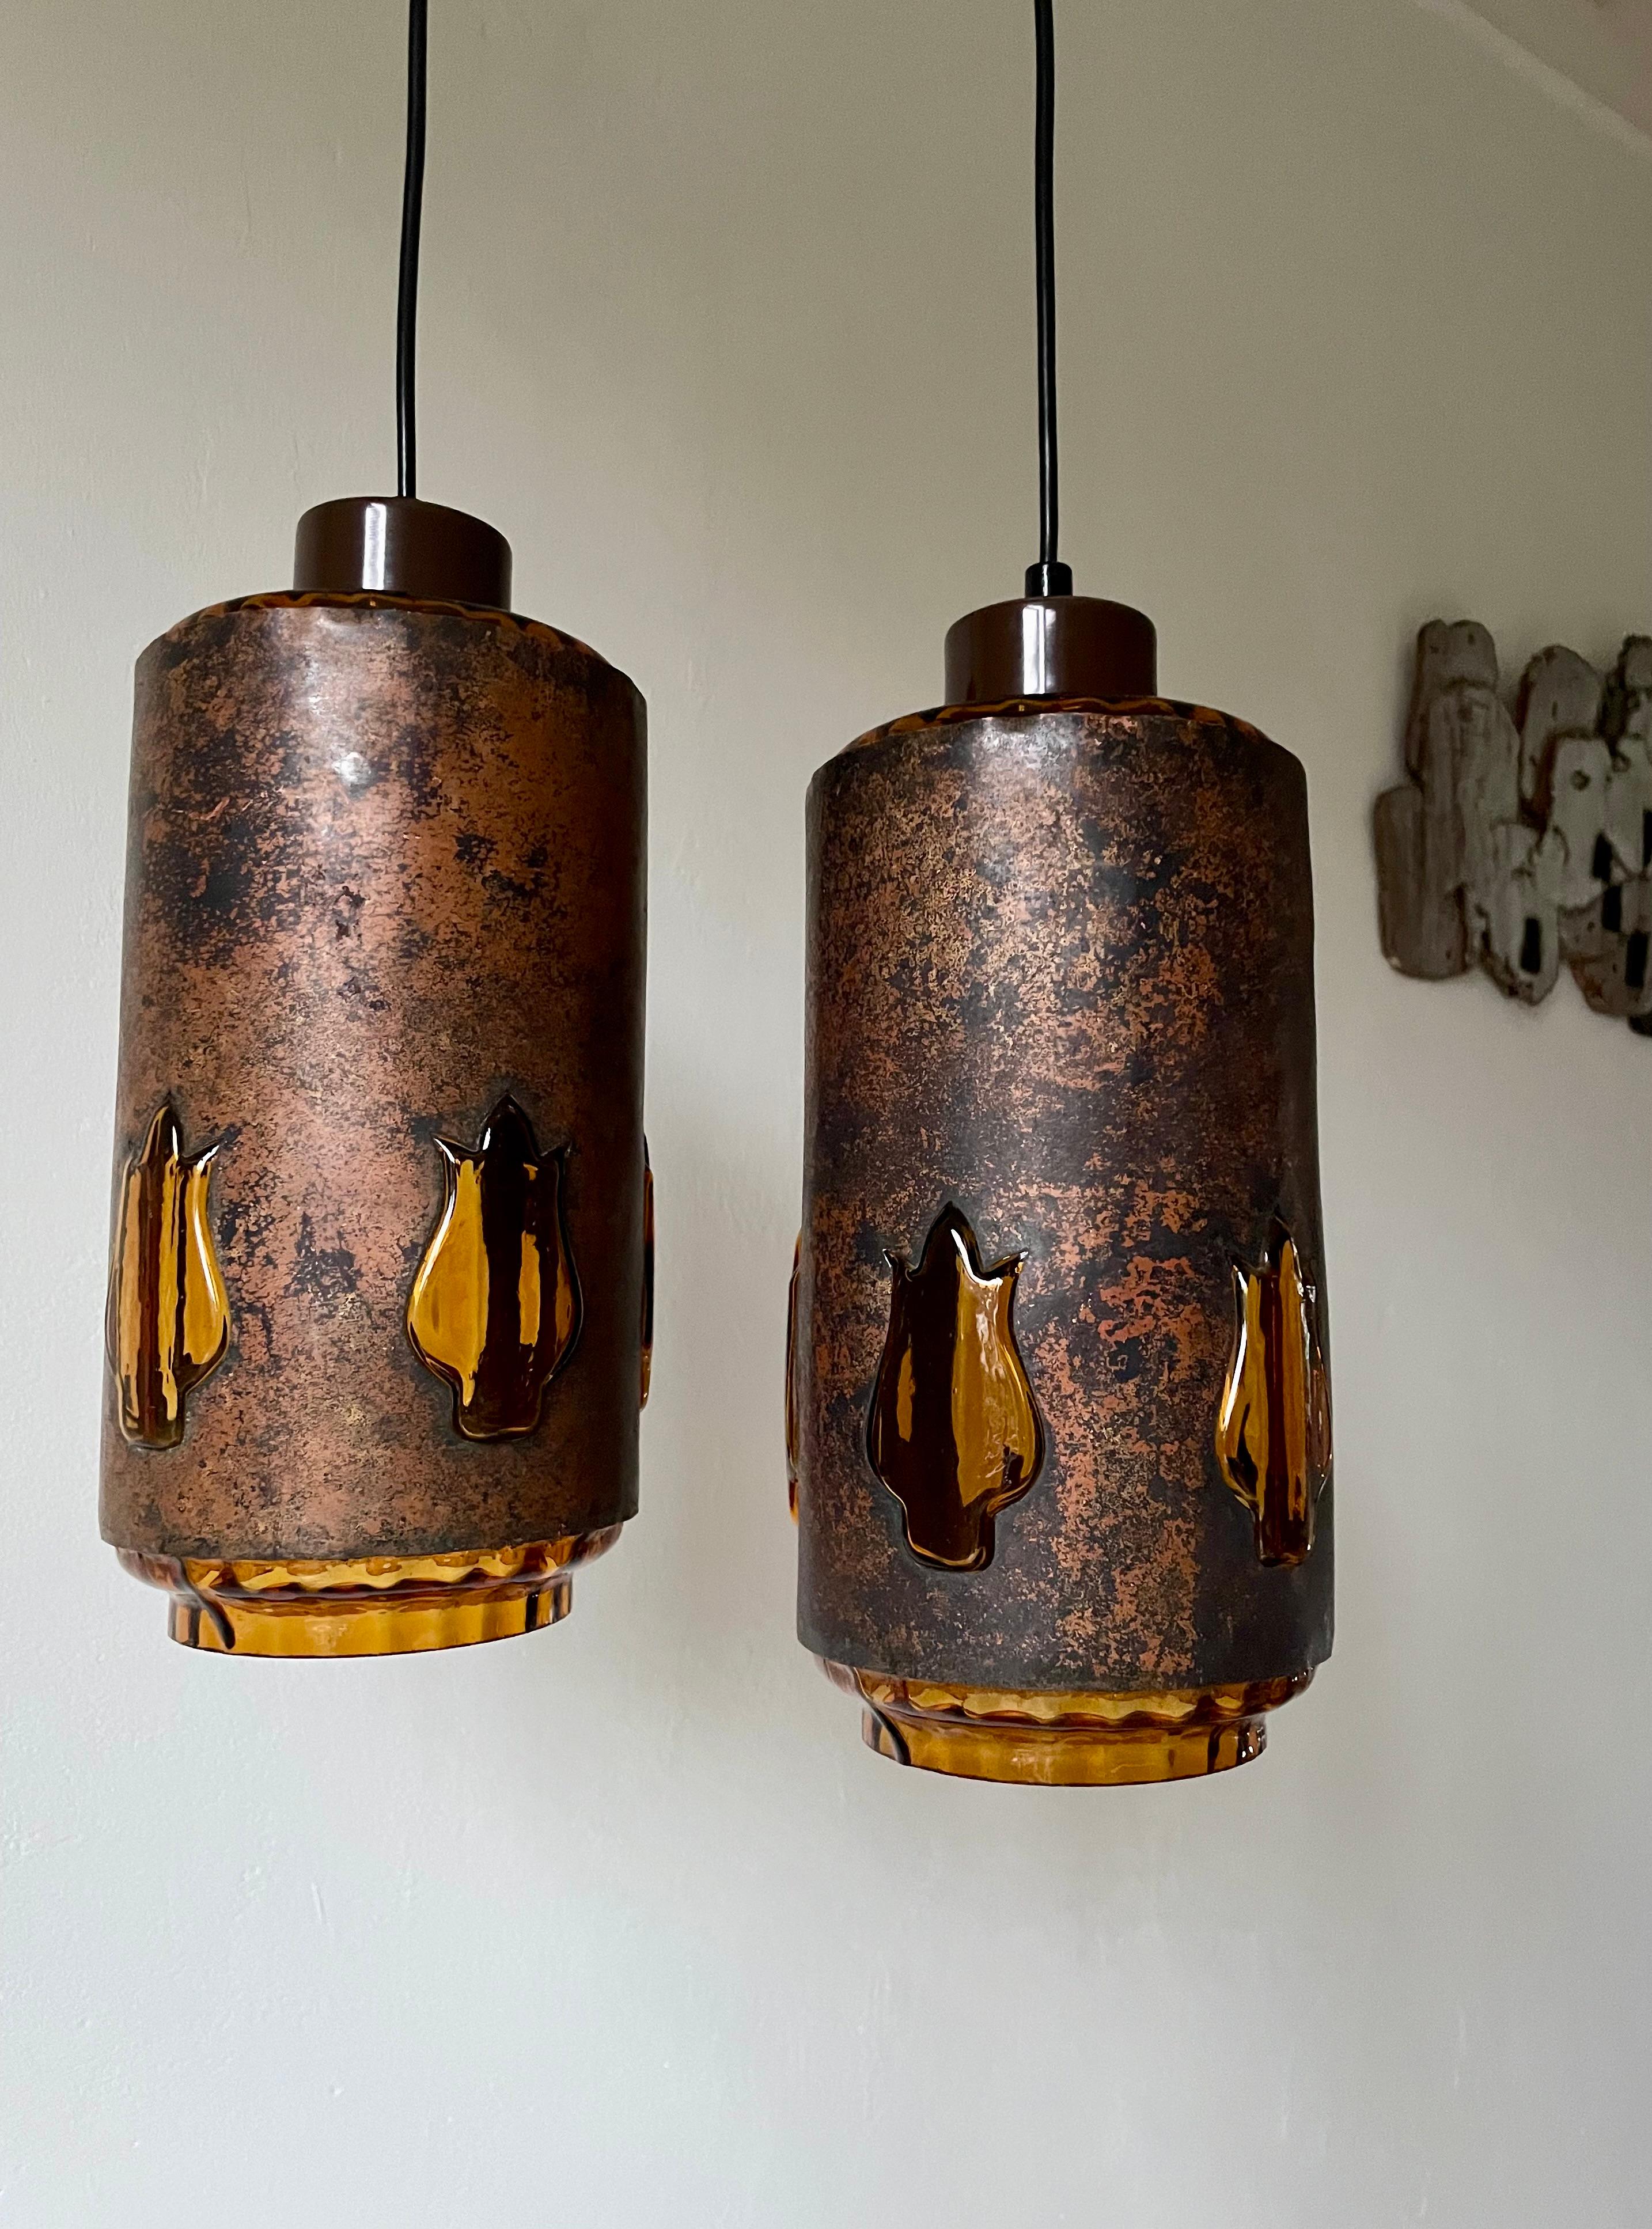 Patinated oxidized copper midcentury brutalist pendants by Nanny Still McKinney for RAAK - each unique in their execution. Cylinder shaped body with thick amber colored glass in the inside and five thick amber colored glass decorations protuding